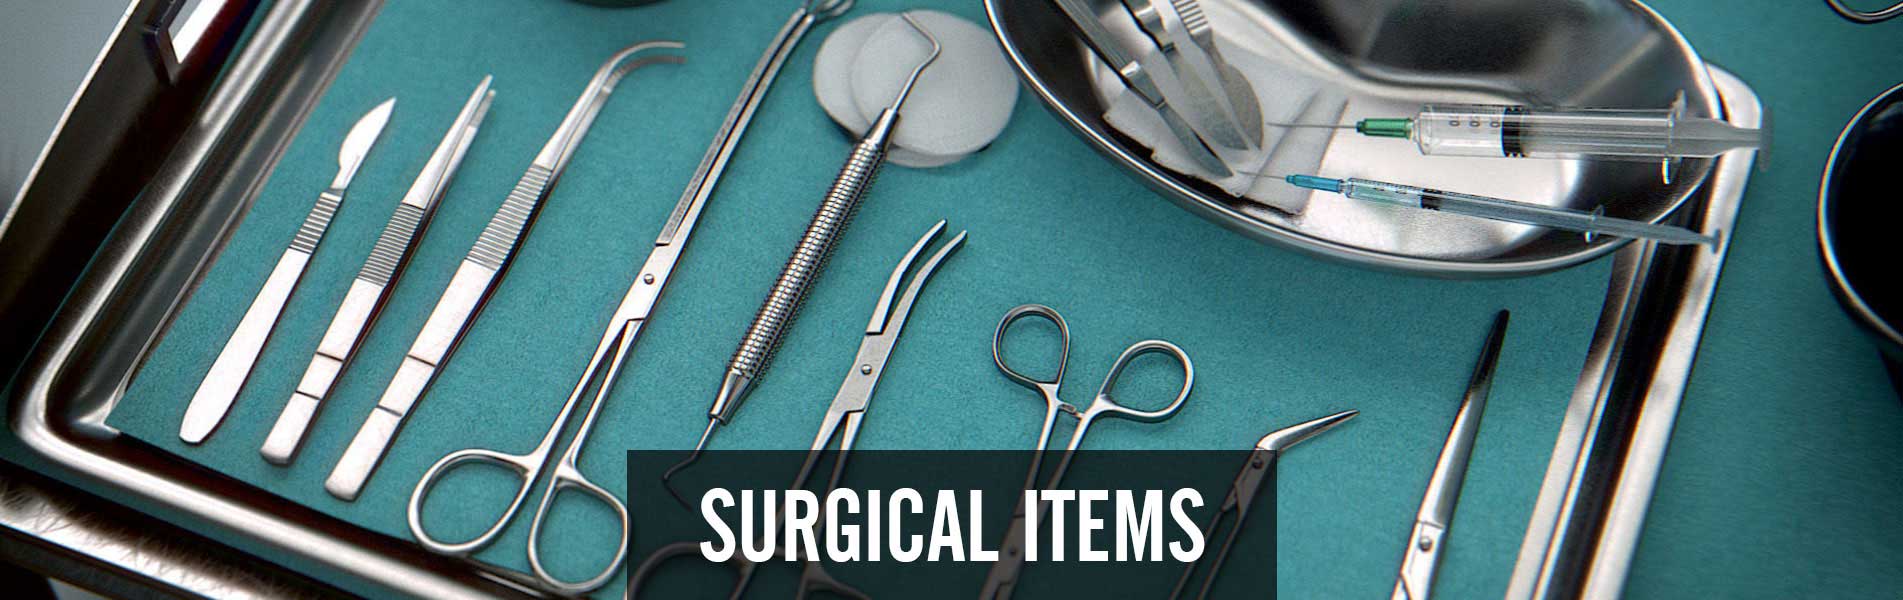 surgical-items